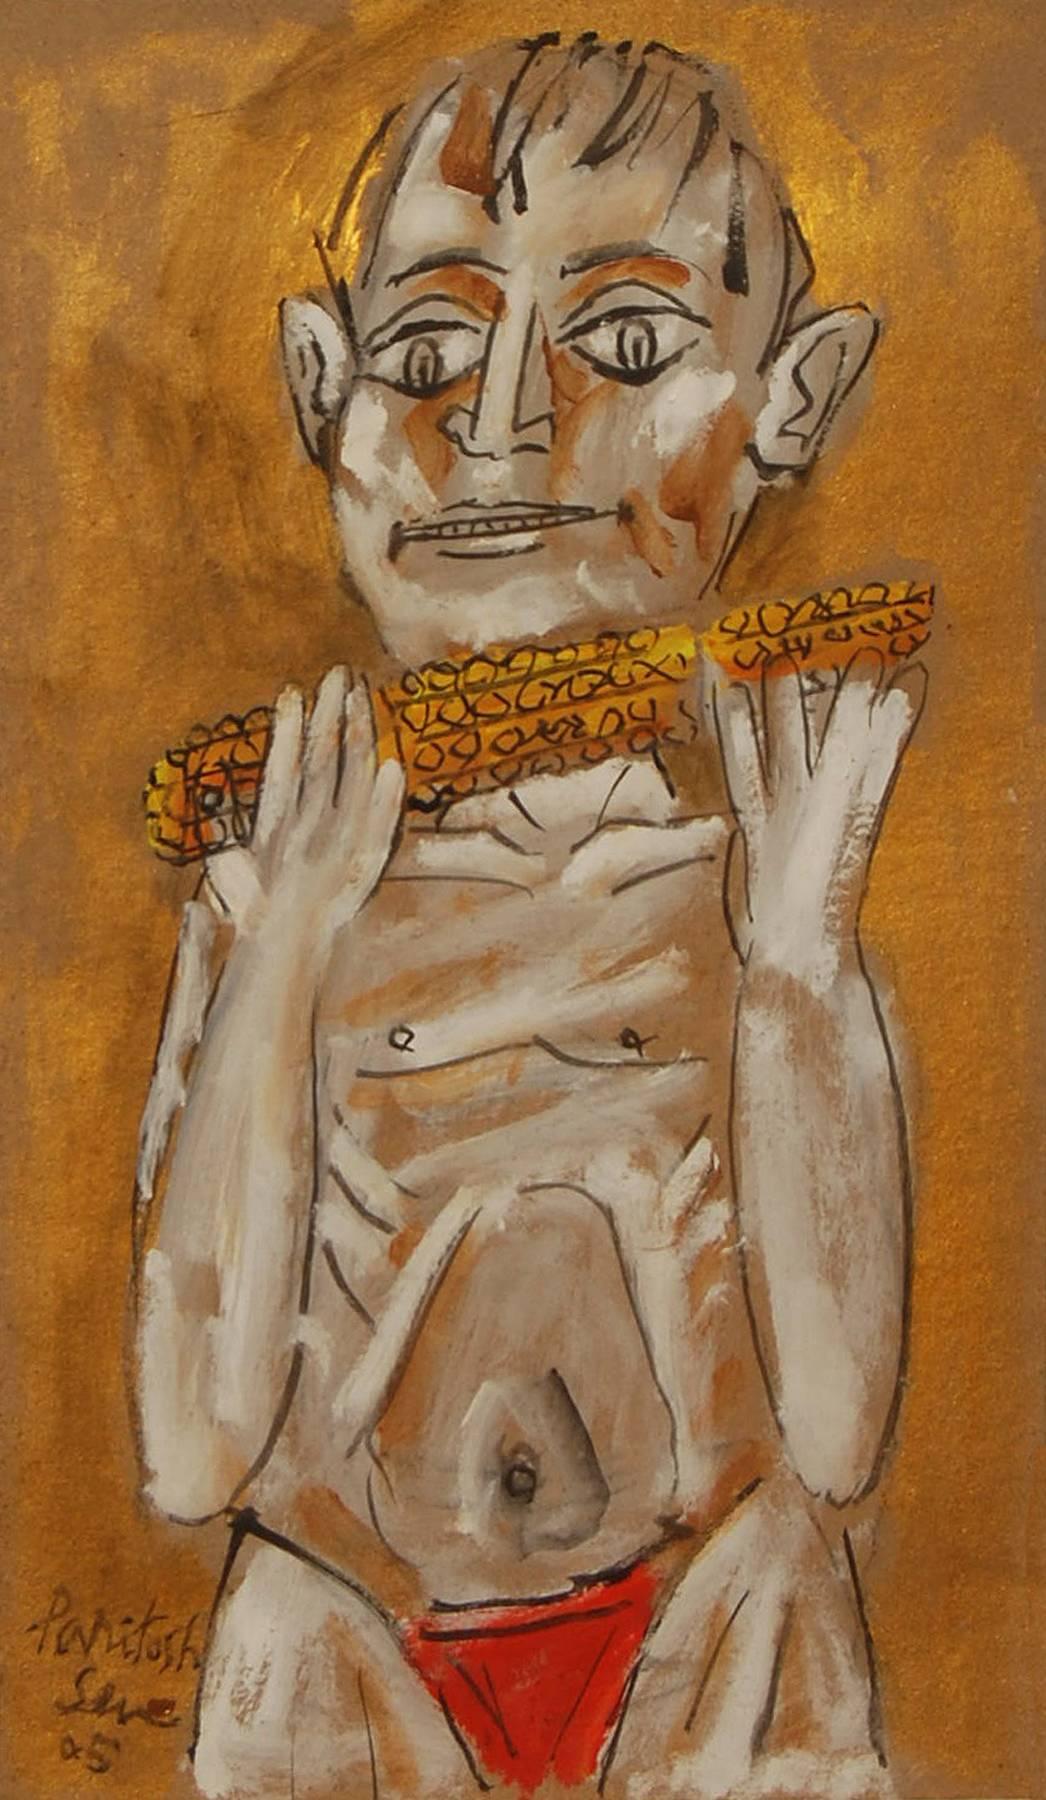 Boy eating Corn, Great Acrylic work by the Student of Picasso, Paritosh Sen